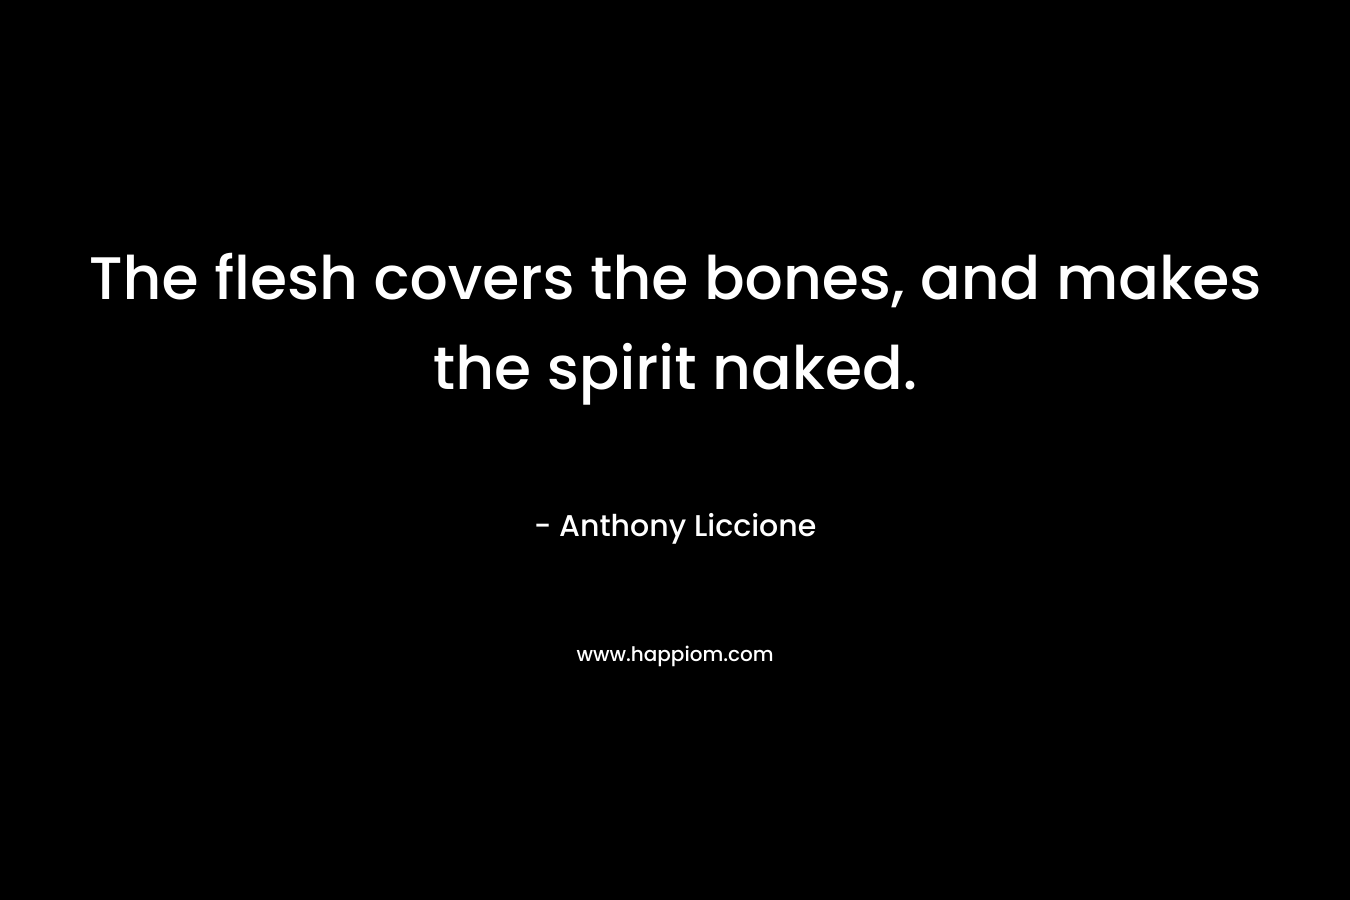 The flesh covers the bones, and makes the spirit naked.